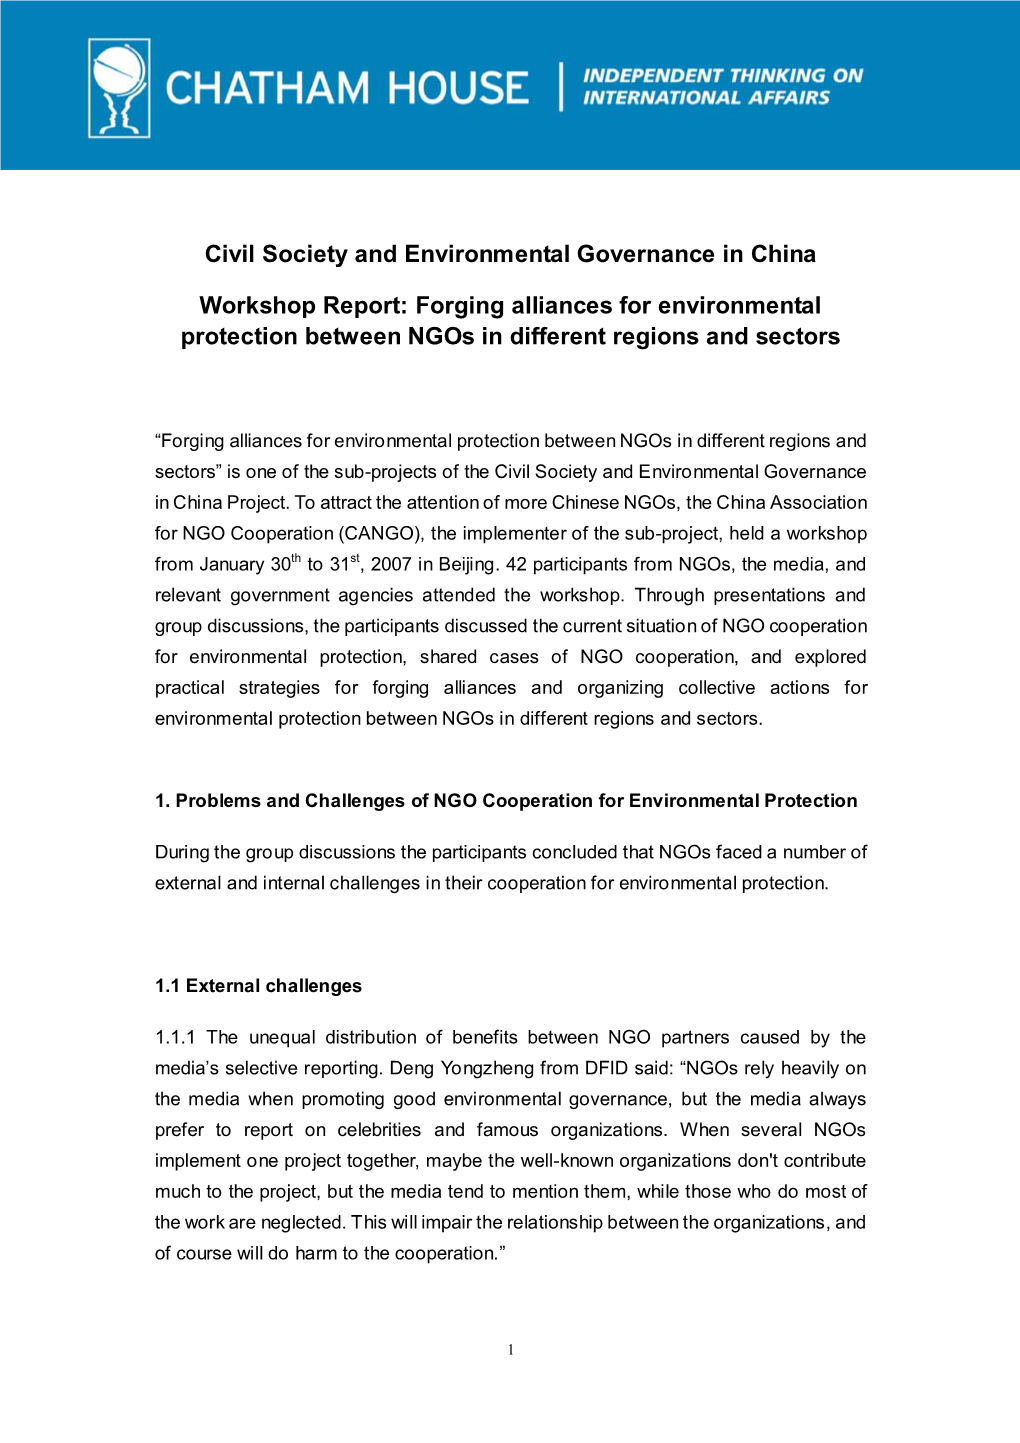 Civil Society and Environmental Governance in China Workshop